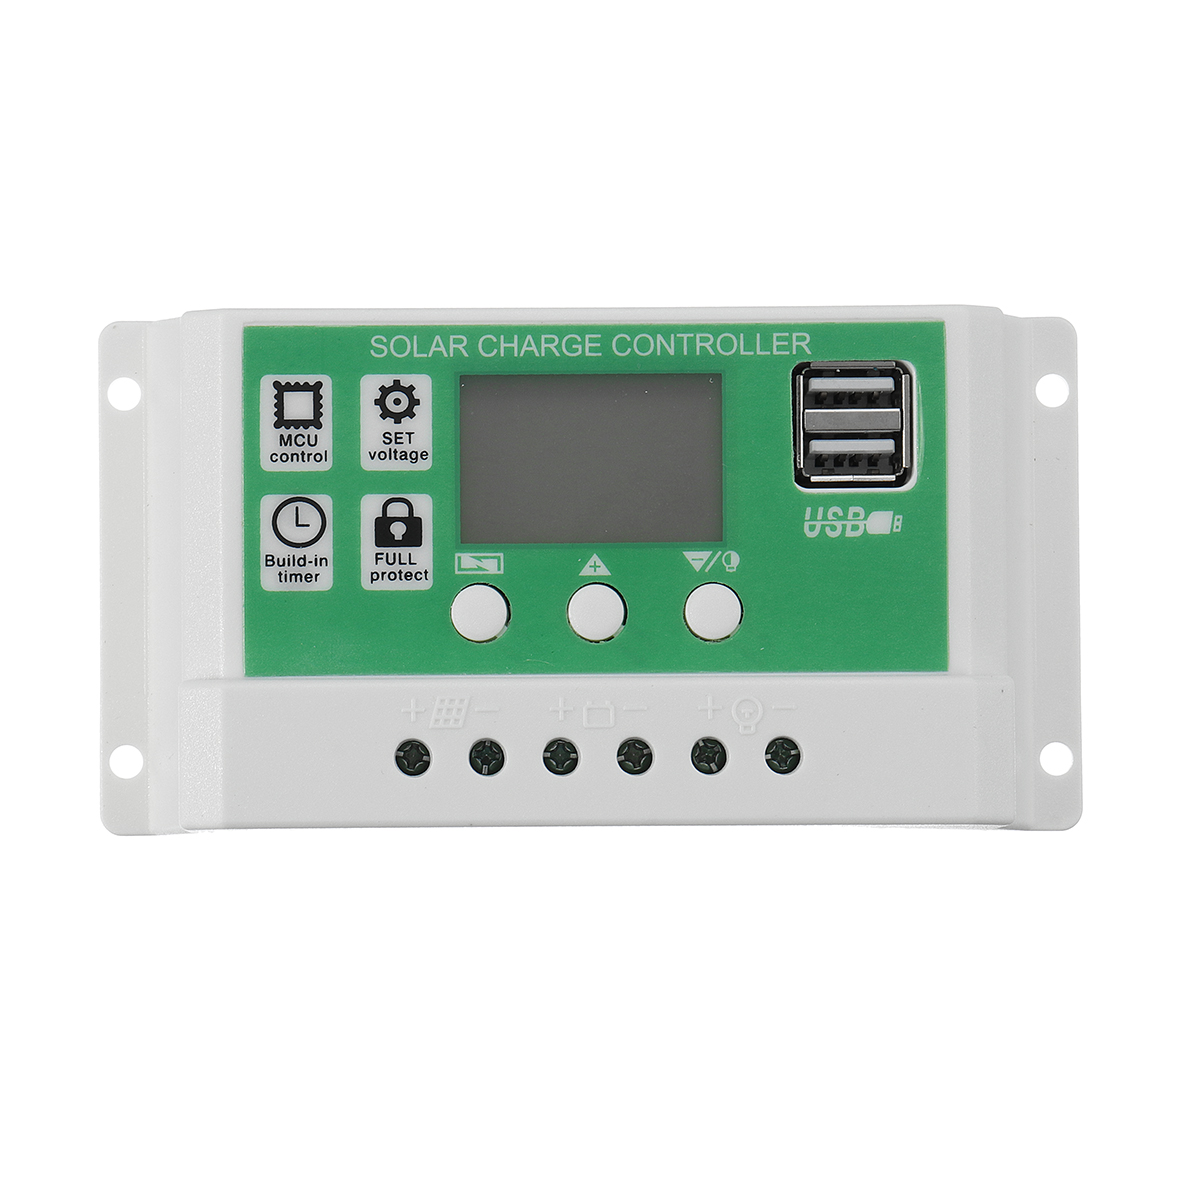 12V24V-10A20A30A-Dual-USB-Output-Lithium-Battery-PWM-Solar-Controller-LCD-display-Street-Lamp-Contro-1542824-6